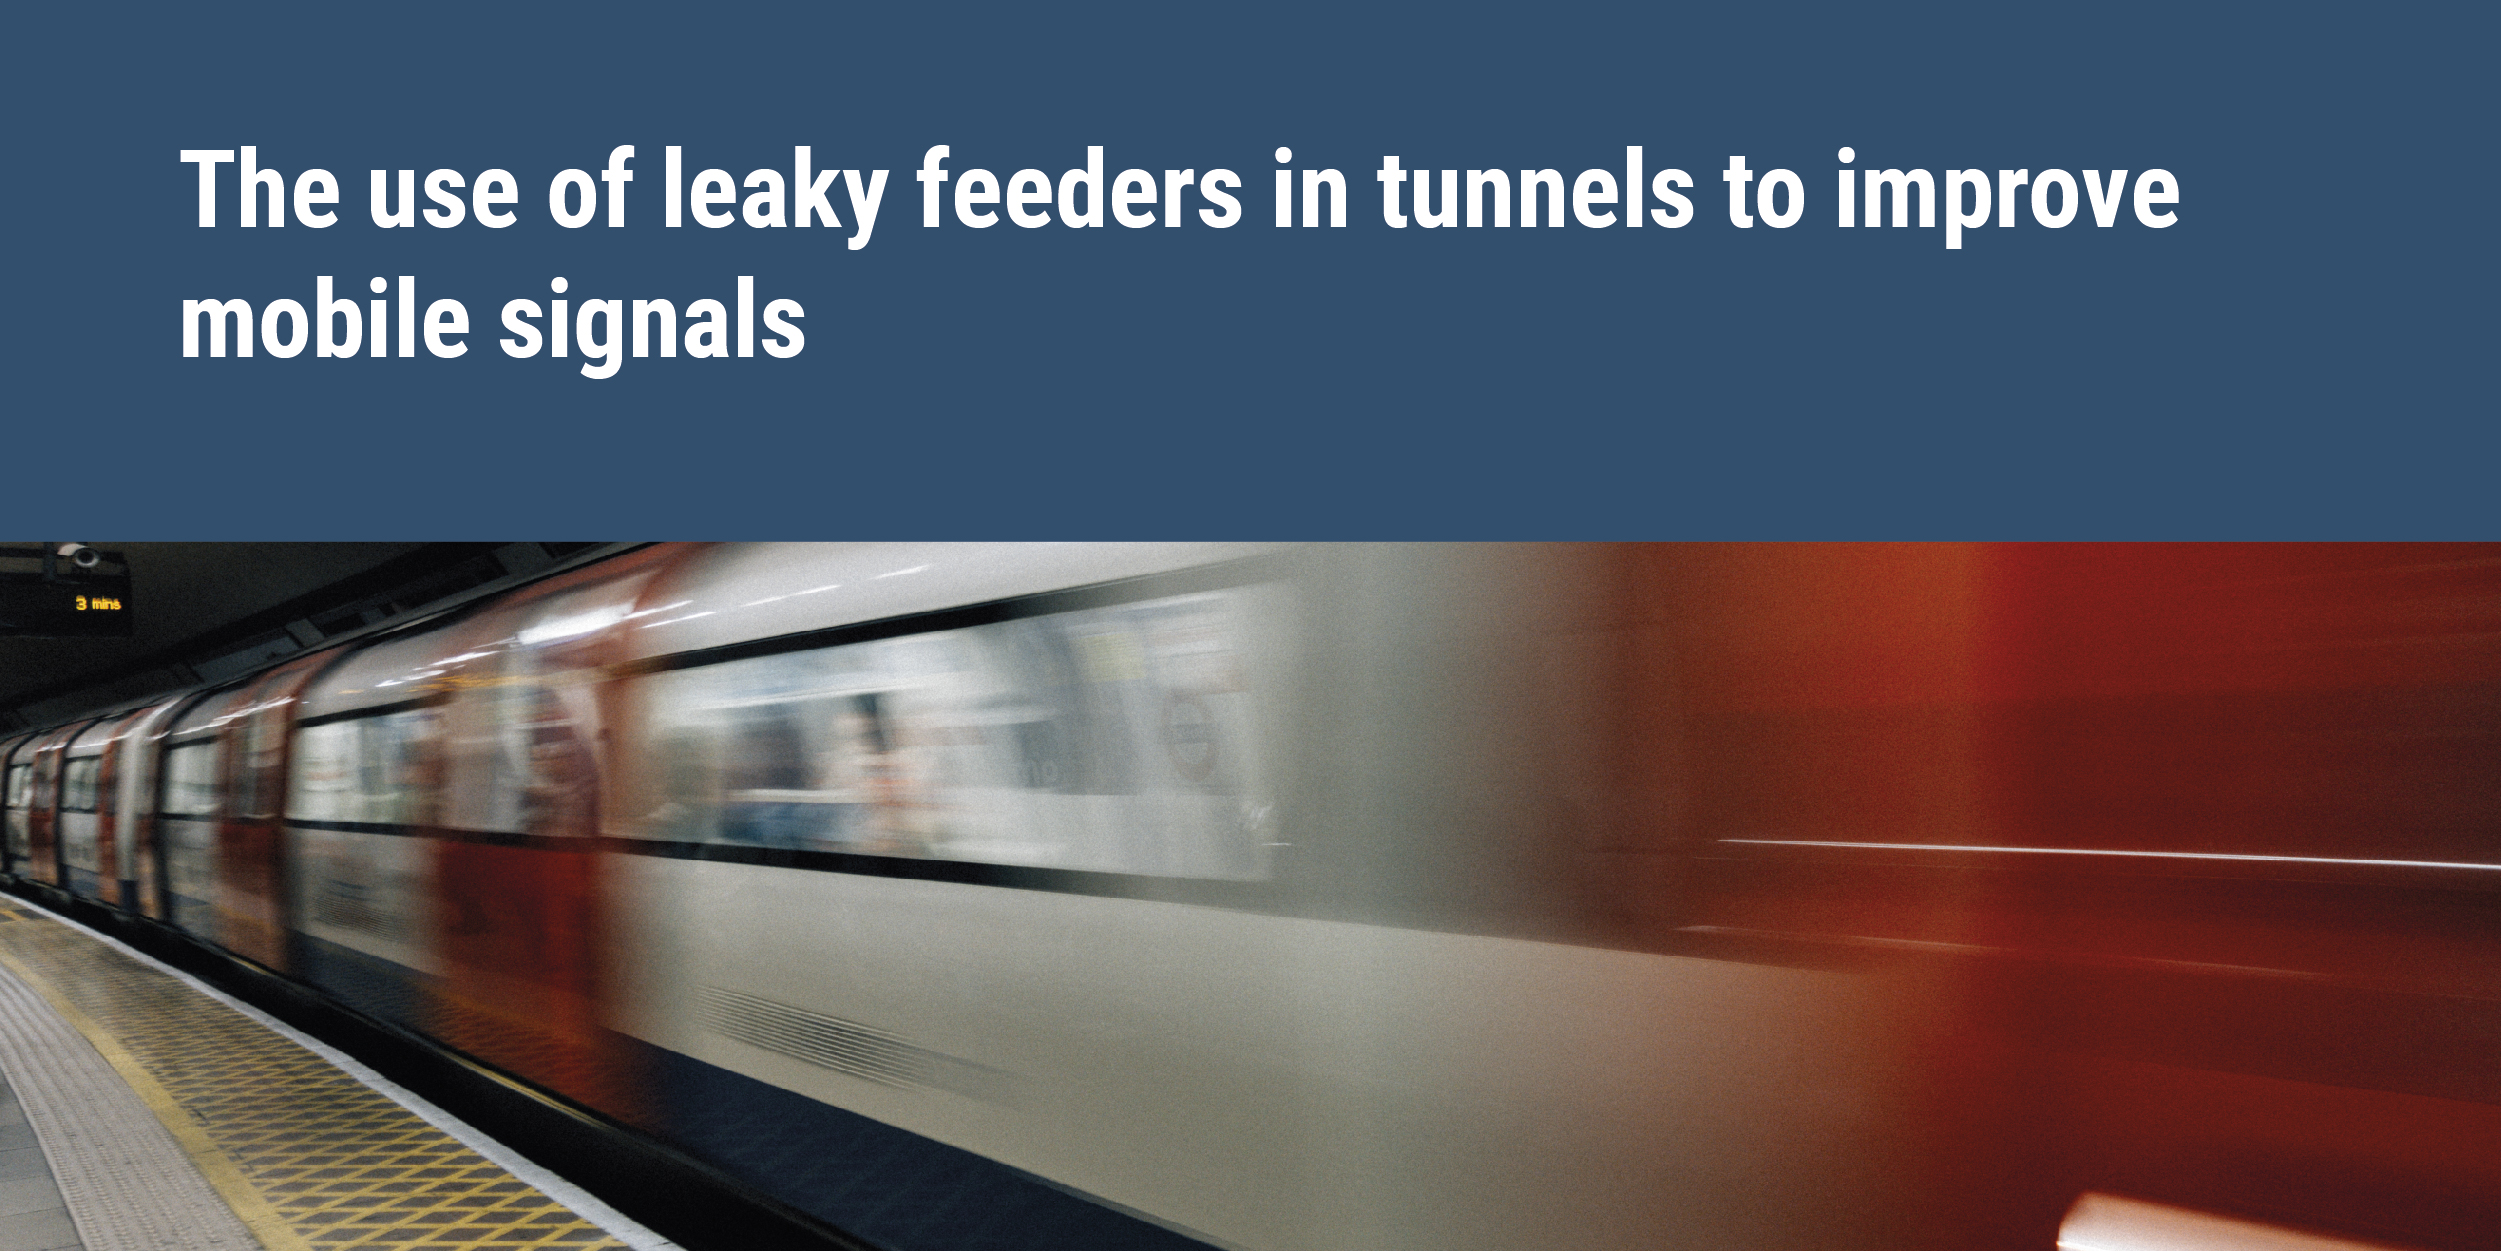 The use of leaky feeders in tunnels to improve mobile signals